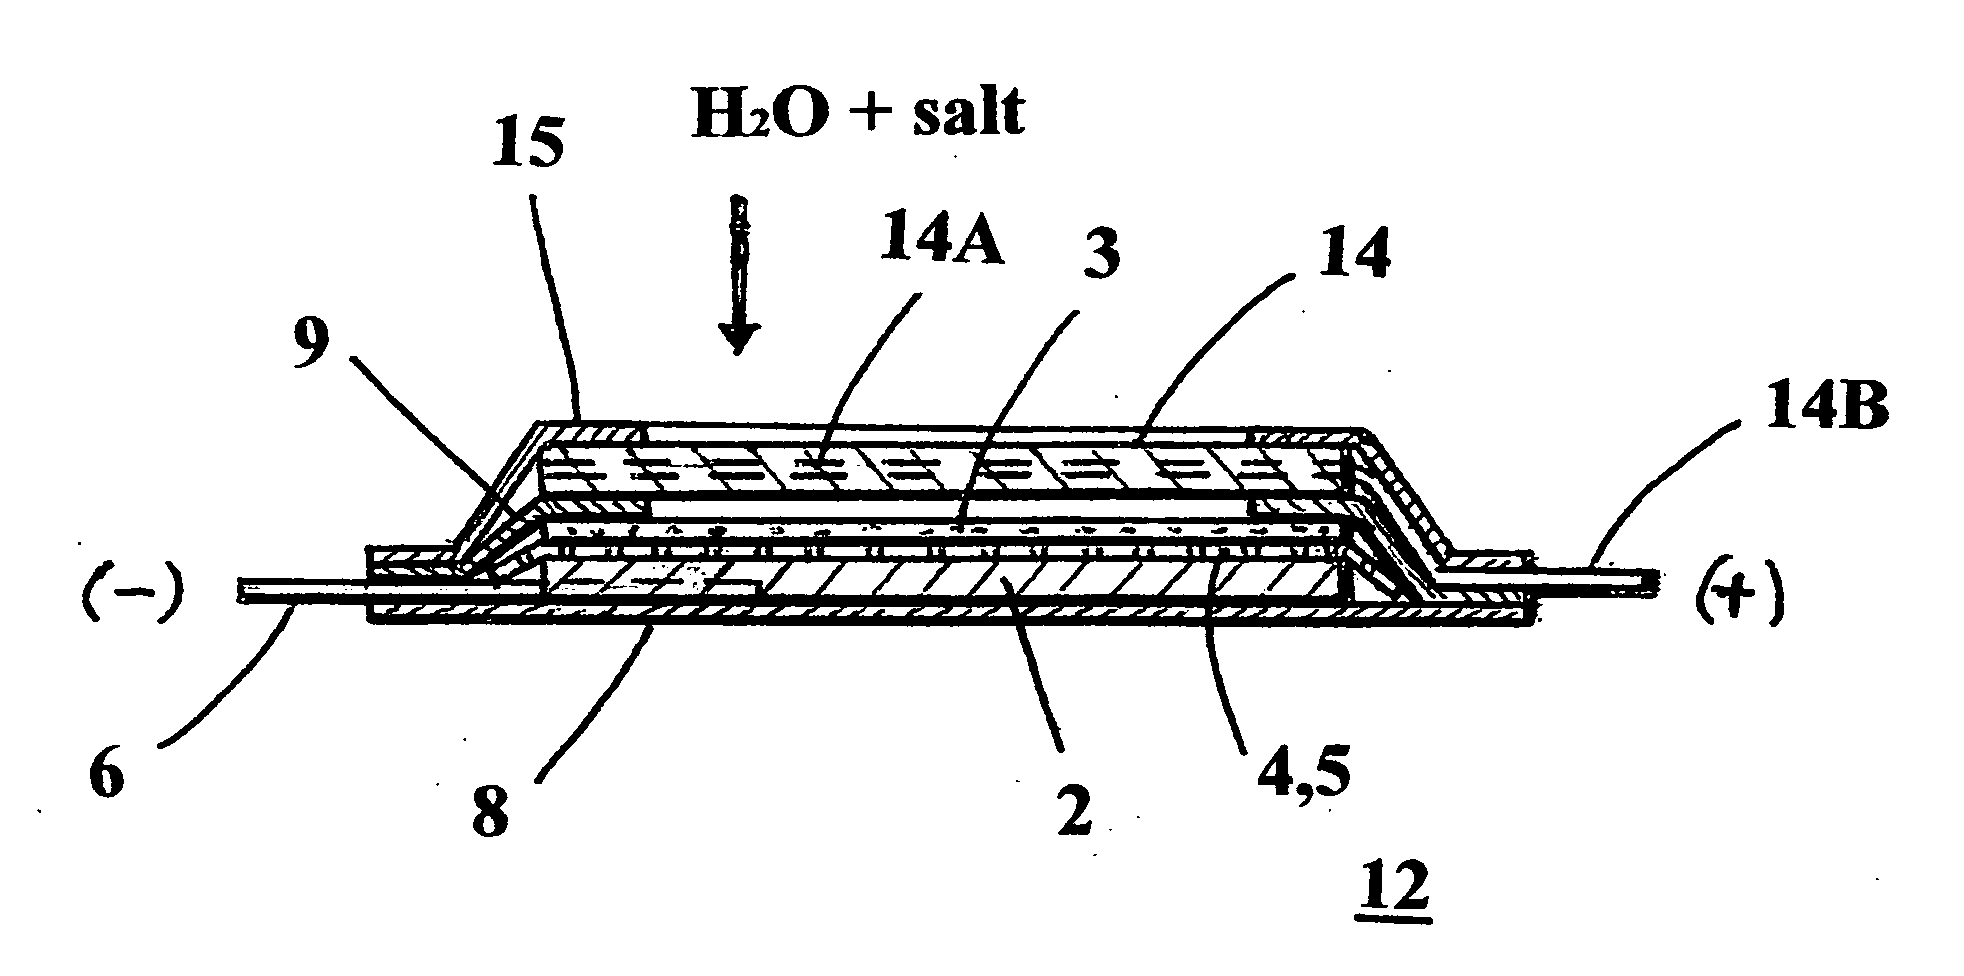 Lithium metal anode construction for seawater or air semi-fuel cells having flexible pouch packaging